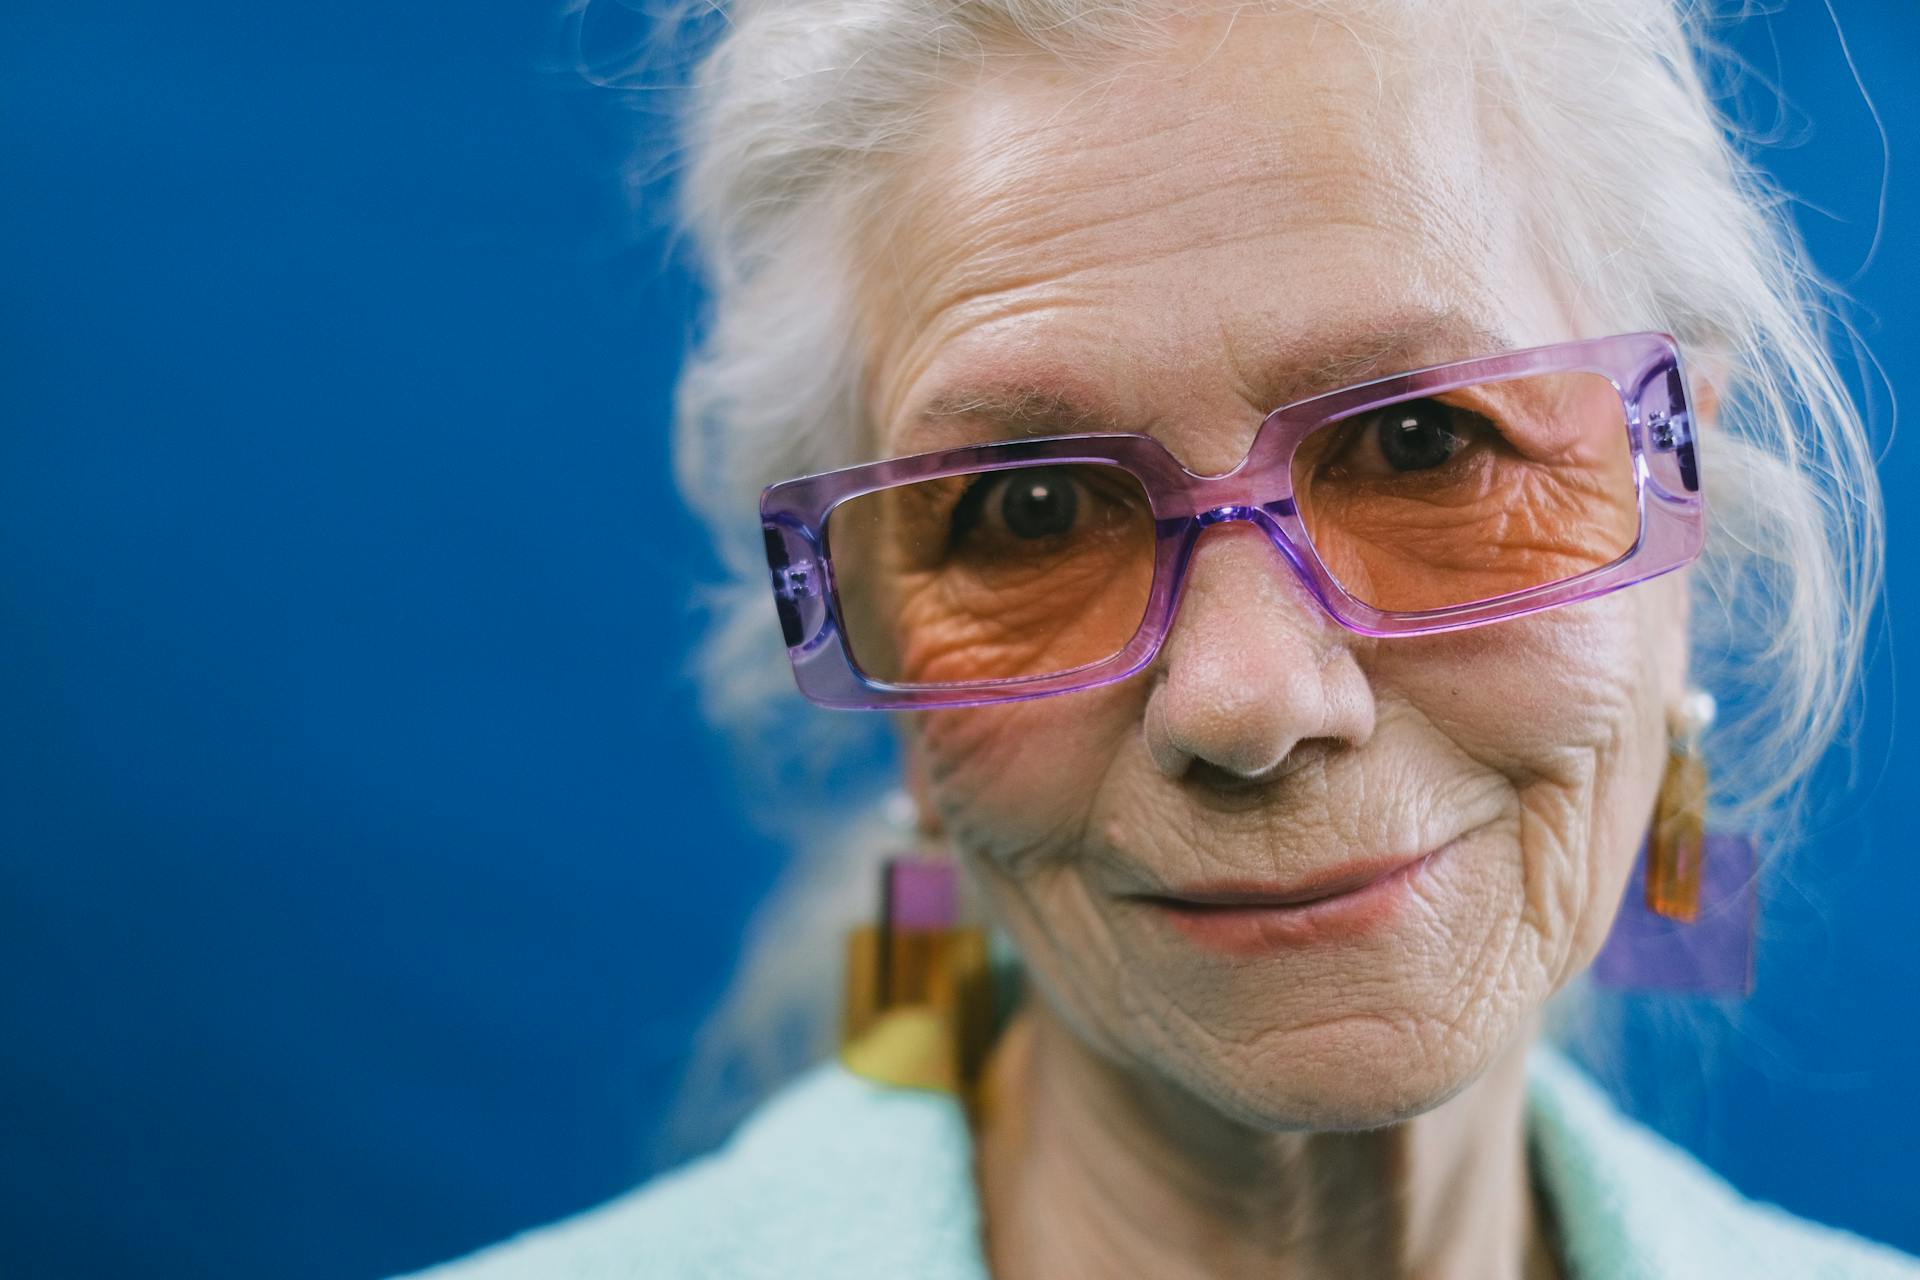 A cheerful older lady smiling at someone | Source: Pexels